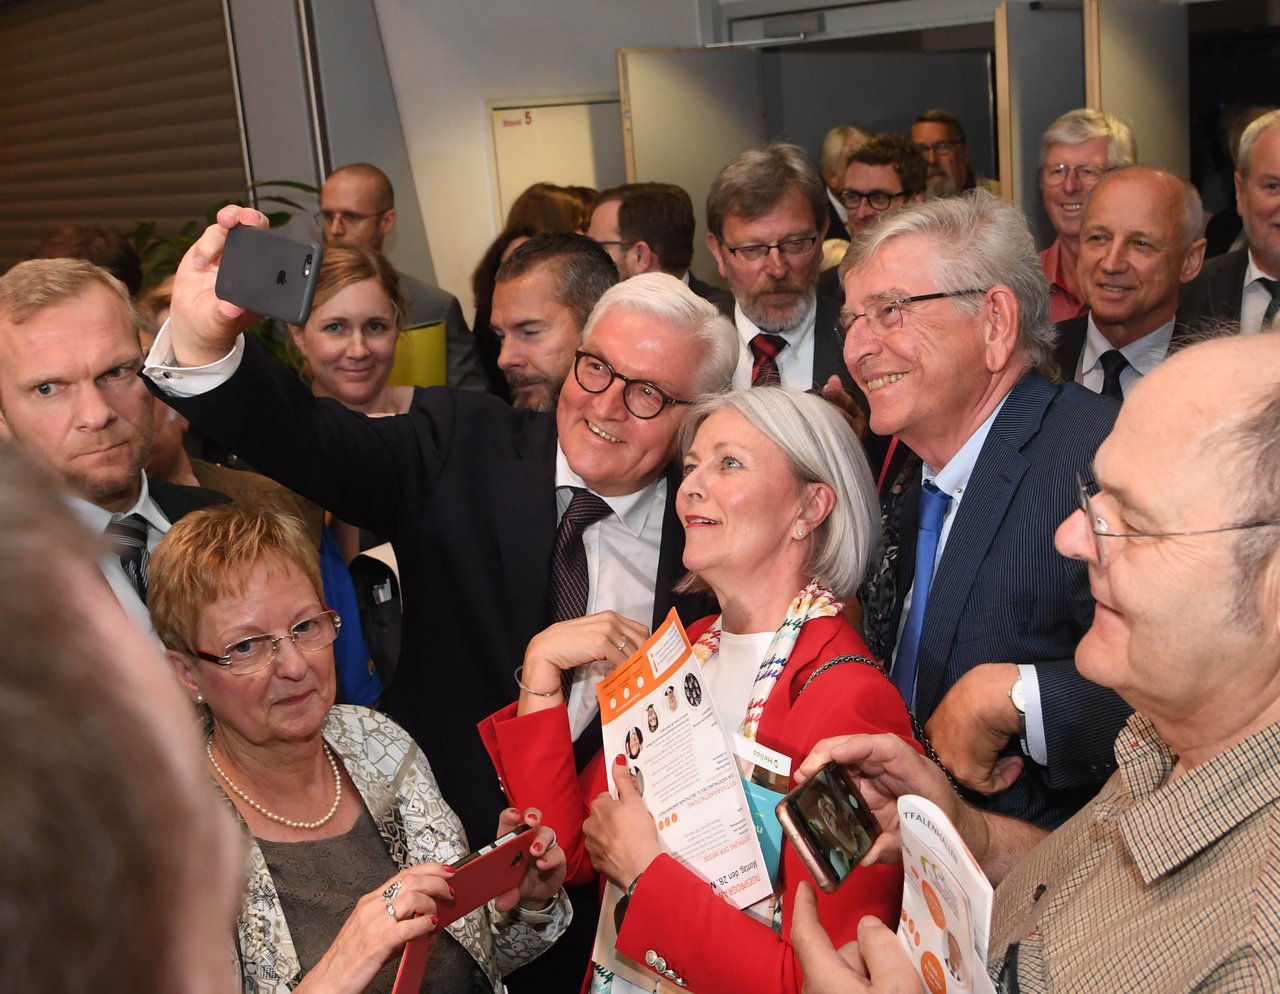 Tje Federal President takes selfie with visitors.